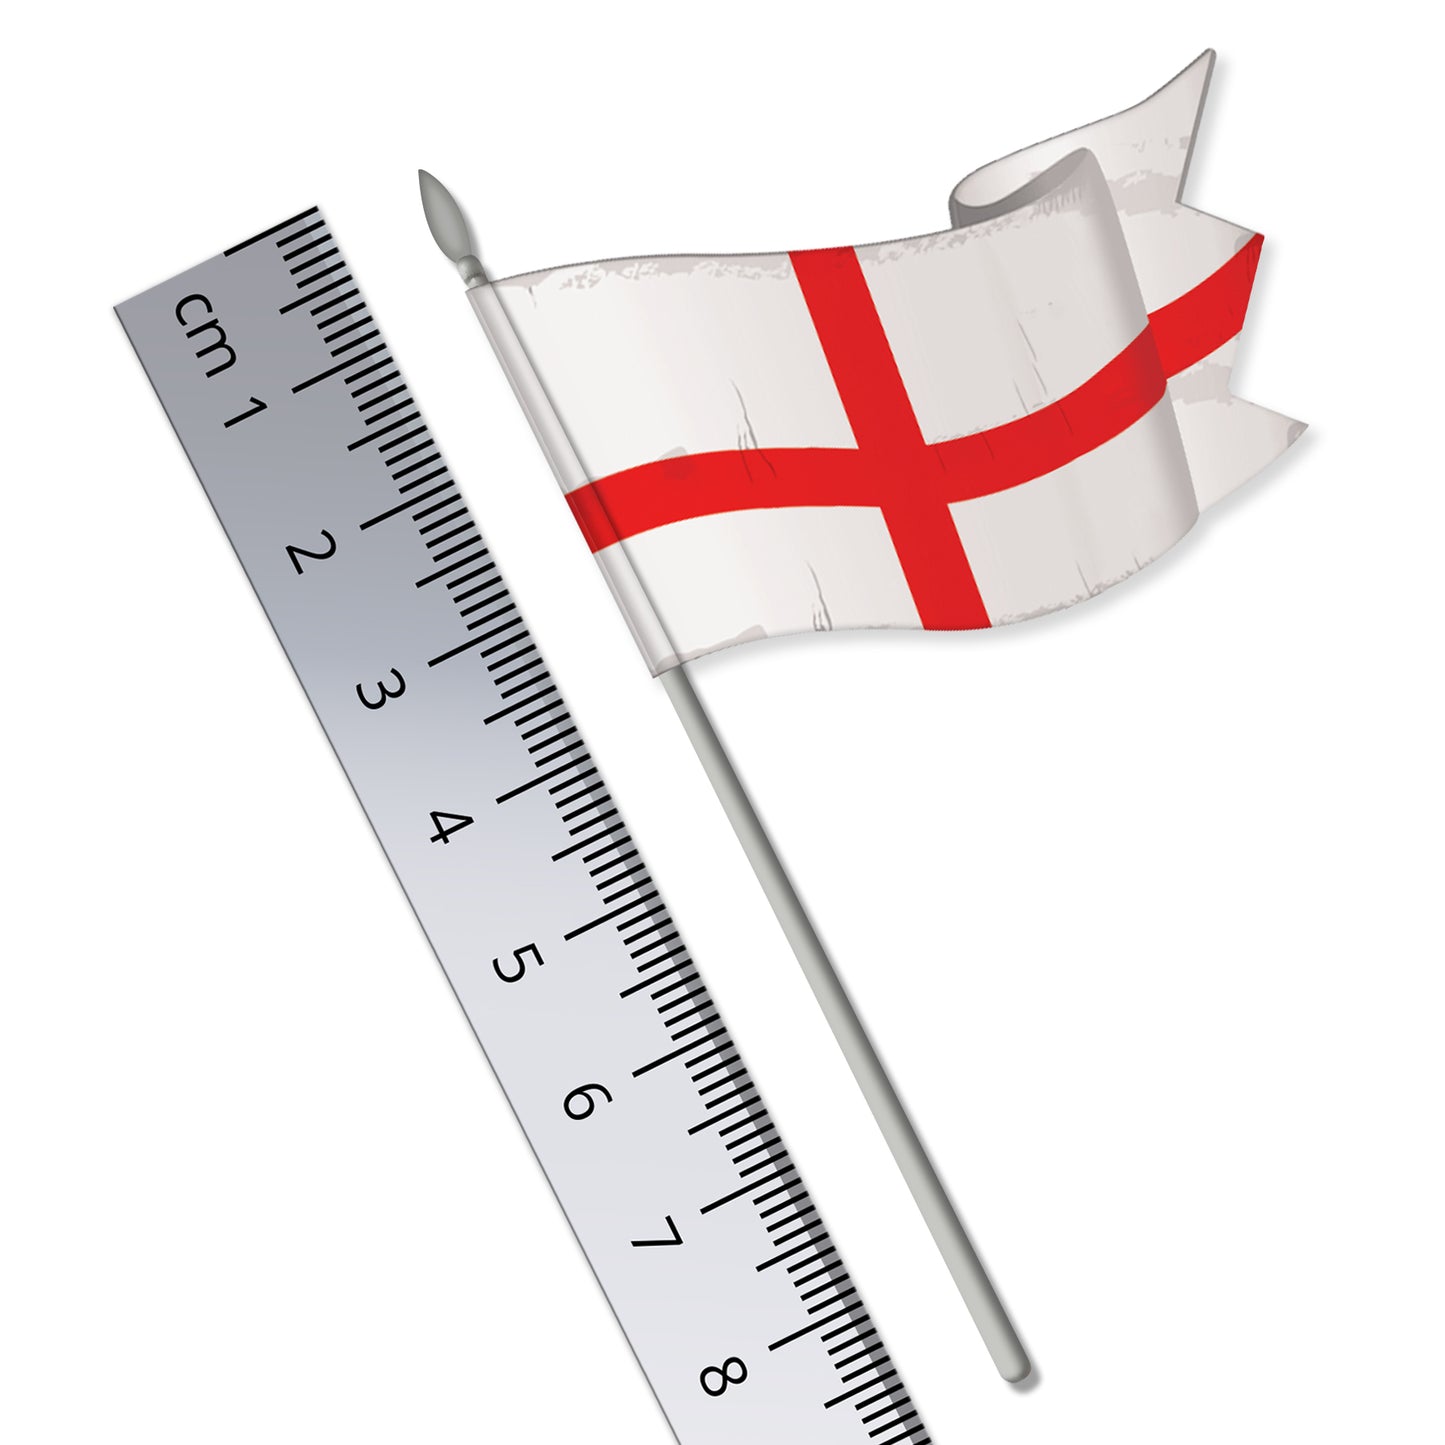 Medieval Knight's Banner Flag (St George's Cross Motif)